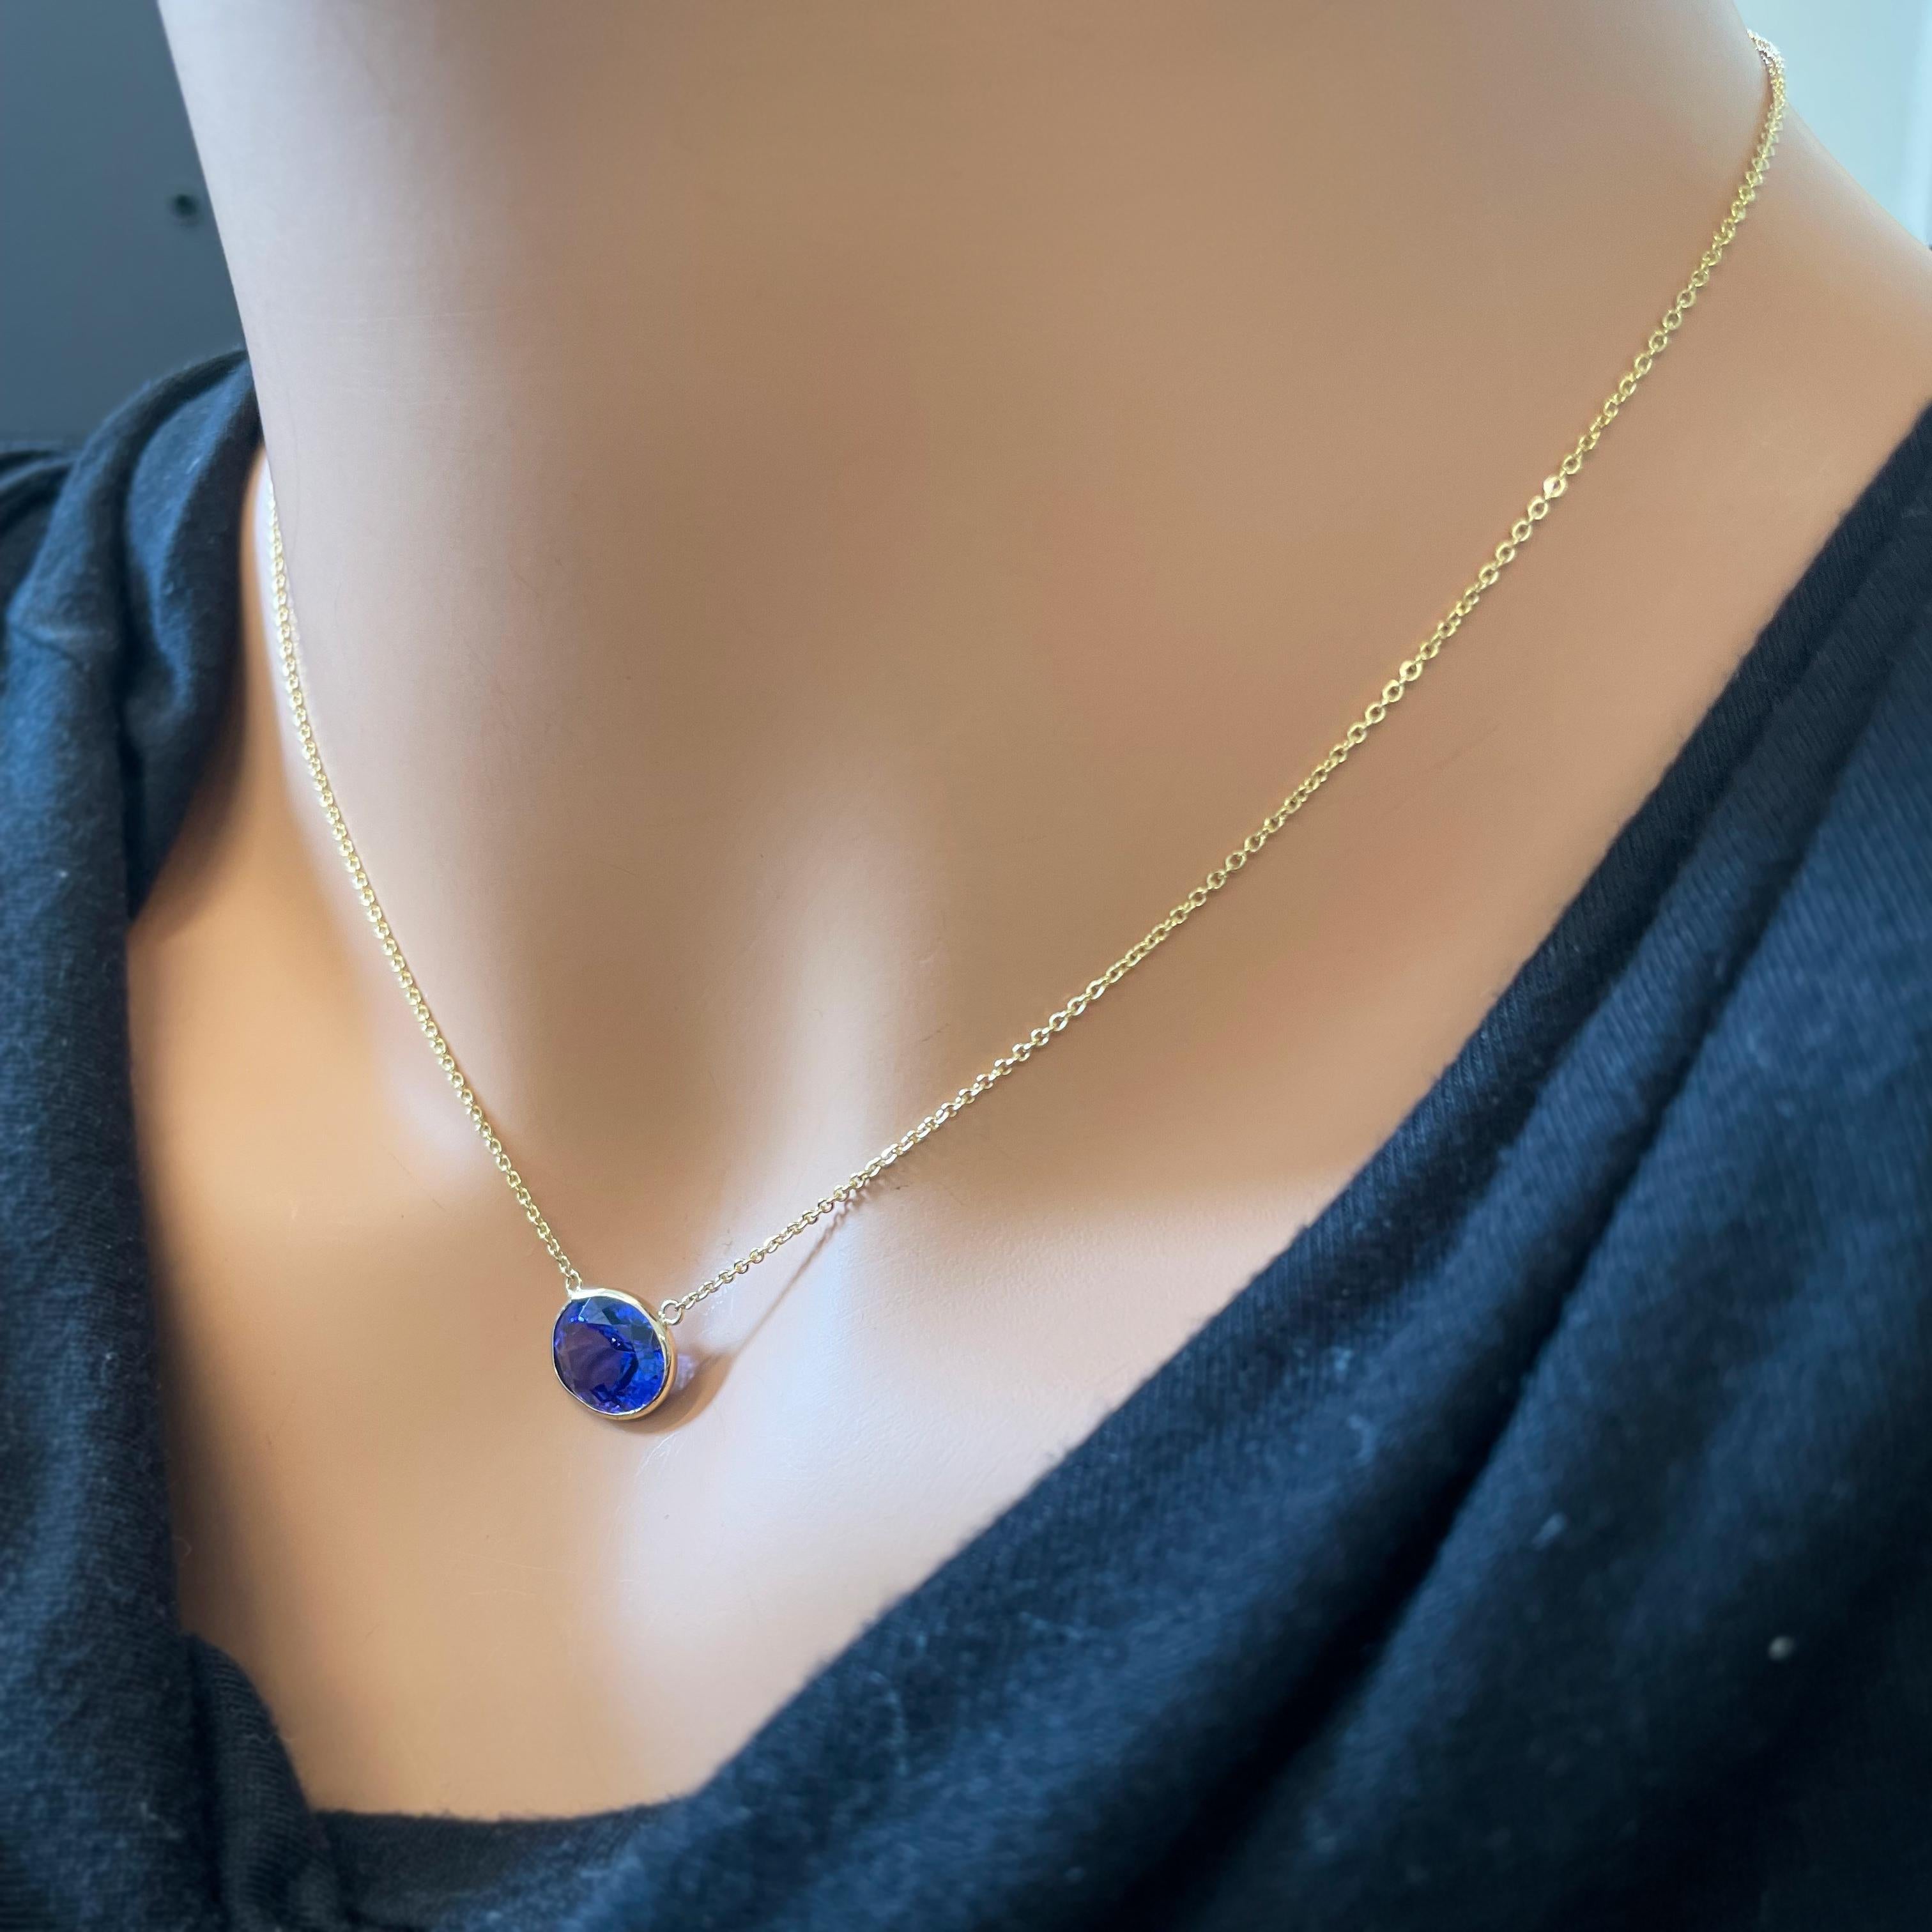 A fashion necklace featuring a blue oval tanzanite with a weight of 4.13 carats set in 14k yellow gold (14k YG) can be a striking and elegant accessory. The focal point of this necklace is a blue oval tanzanite with a significant weight of 4.13